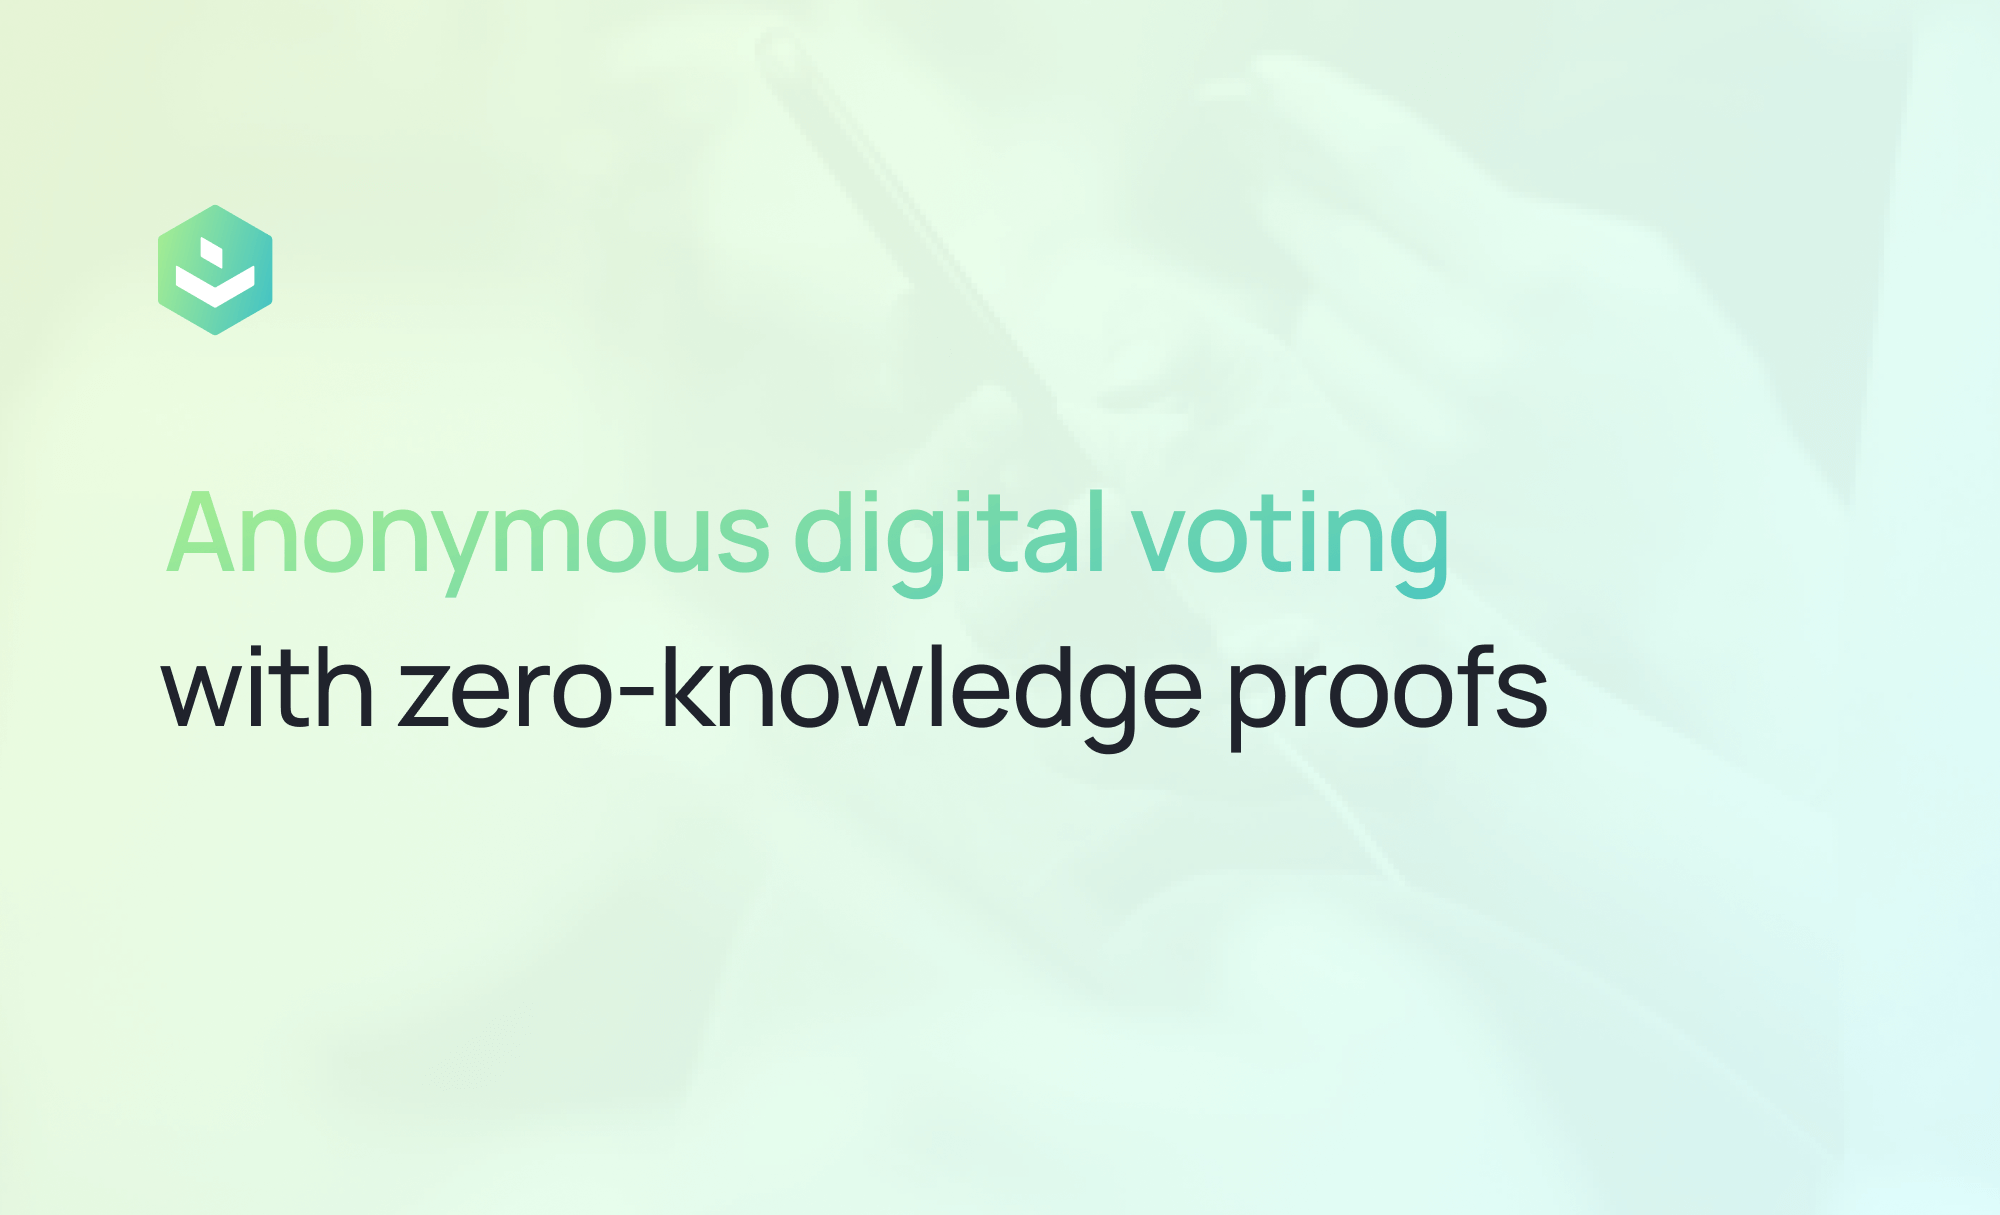 It's not that bad: Open letter to MIT Digital Currency Initiative on anonymous voting